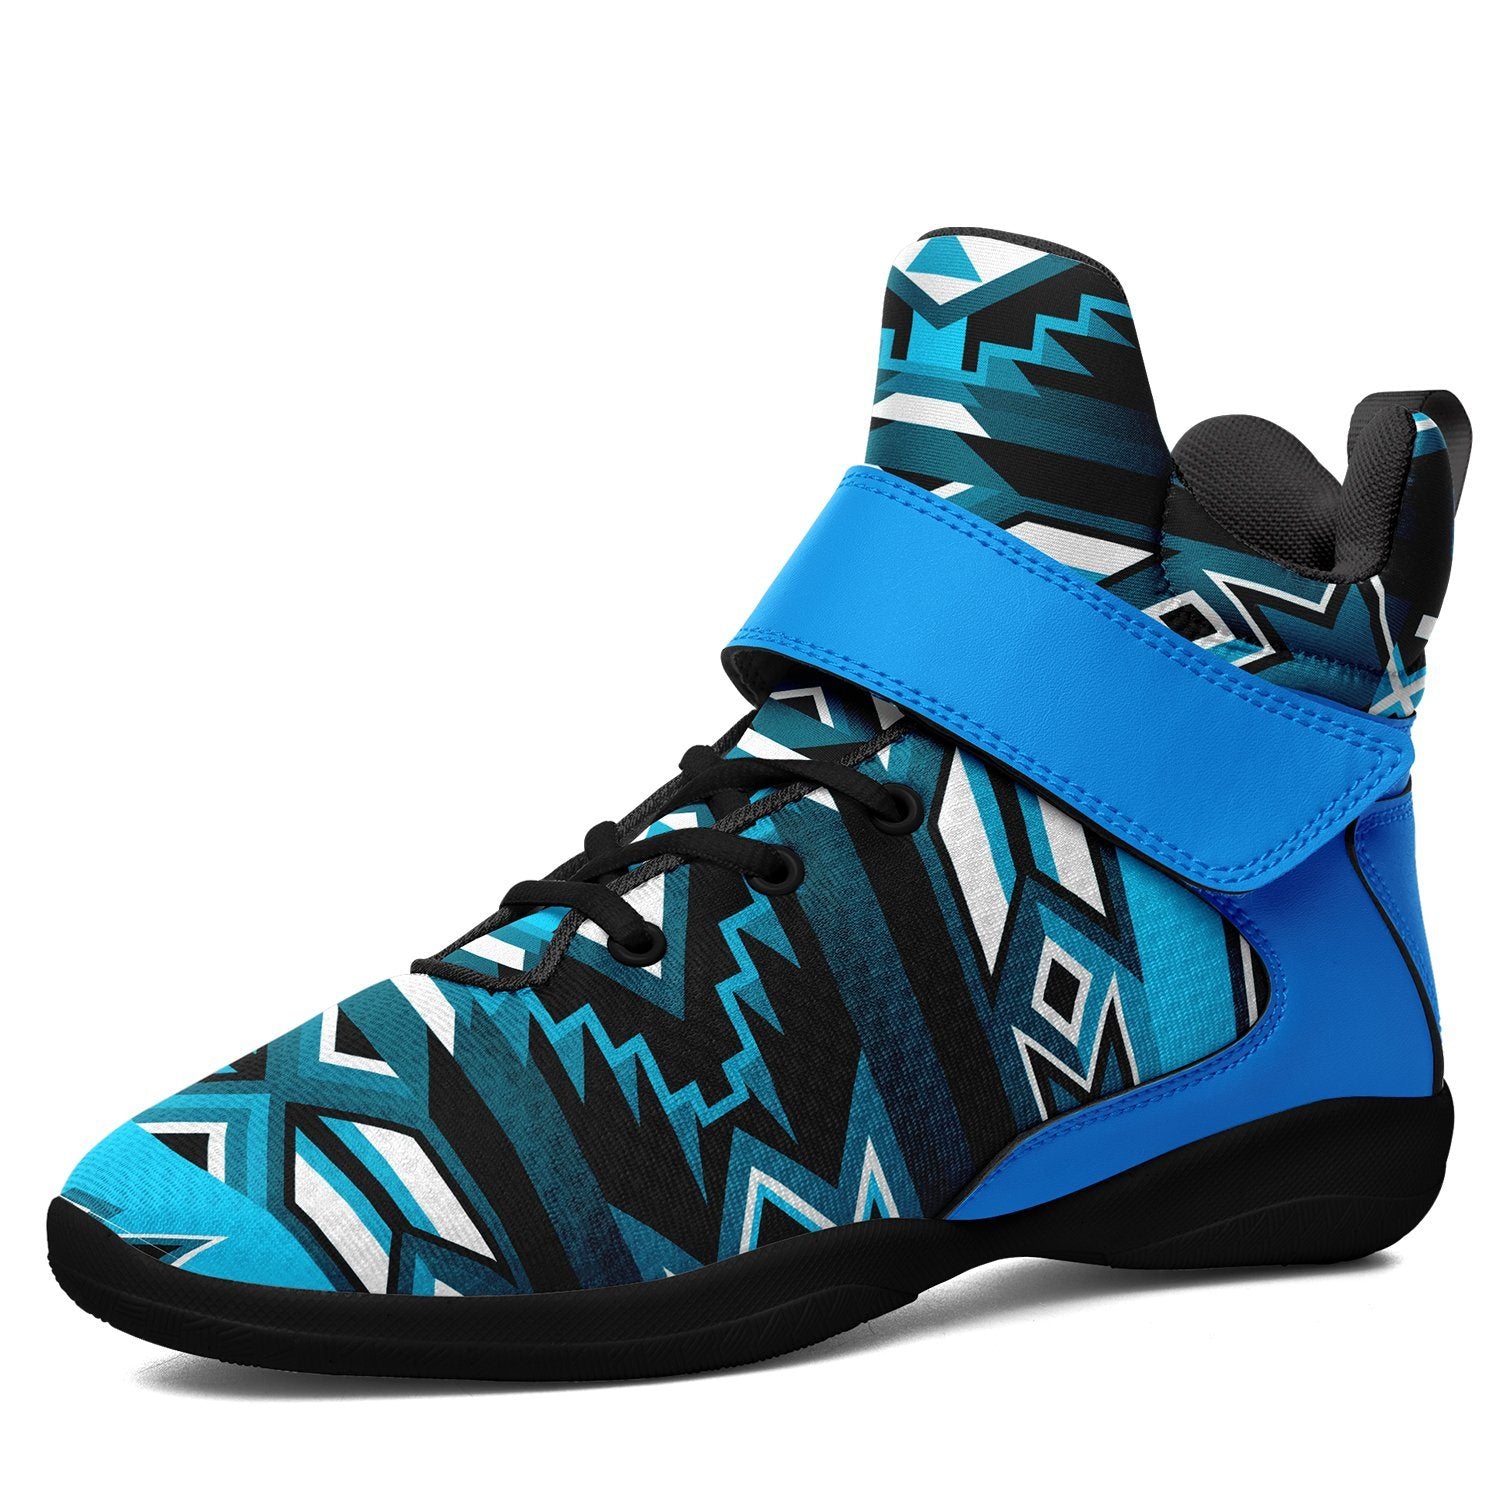 Northern Journey Ipottaa Basketball / Sport High Top Shoes 49 Dzine US Women 4.5 / US Youth 3.5 / EUR 35 Black Sole with Light Blue Strap 